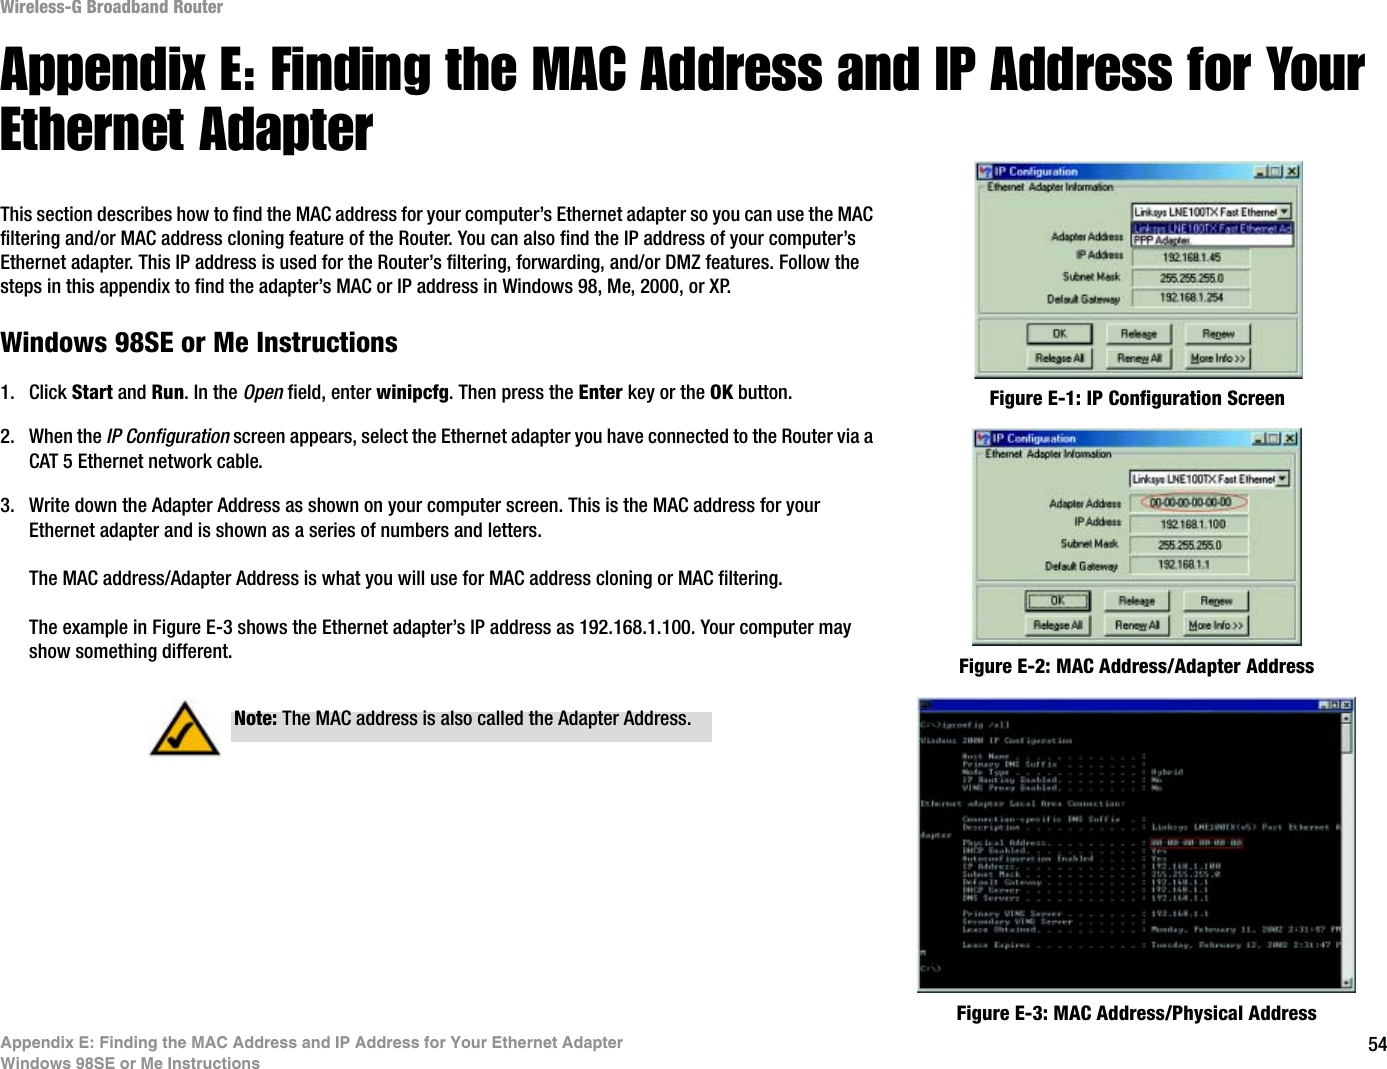 54Appendix E: Finding the MAC Address and IP Address for Your Ethernet AdapterWindows 98SE or Me InstructionsWireless-G Broadband RouterAppendix E: Finding the MAC Address and IP Address for Your Ethernet AdapterThis section describes how to find the MAC address for your computer’s Ethernet adapter so you can use the MAC filtering and/or MAC address cloning feature of the Router. You can also find the IP address of your computer’s Ethernet adapter. This IP address is used for the Router’s filtering, forwarding, and/or DMZ features. Follow the steps in this appendix to find the adapter’s MAC or IP address in Windows 98, Me, 2000, or XP.Windows 98SE or Me Instructions1. Click Start and Run. In the Open field, enter winipcfg. Then press the Enter key or the OK button. 2. When the IP Configuration screen appears, select the Ethernet adapter you have connected to the Router via a CAT 5 Ethernet network cable.3. Write down the Adapter Address as shown on your computer screen. This is the MAC address for your Ethernet adapter and is shown as a series of numbers and letters.The MAC address/Adapter Address is what you will use for MAC address cloning or MAC filtering.The example in Figure E-3 shows the Ethernet adapter’s IP address as 192.168.1.100. Your computer may show something different. Figure E-2: MAC Address/Adapter AddressFigure E-1: IP Configuration ScreenNote: The MAC address is also called the Adapter Address.Figure E-3: MAC Address/Physical Address